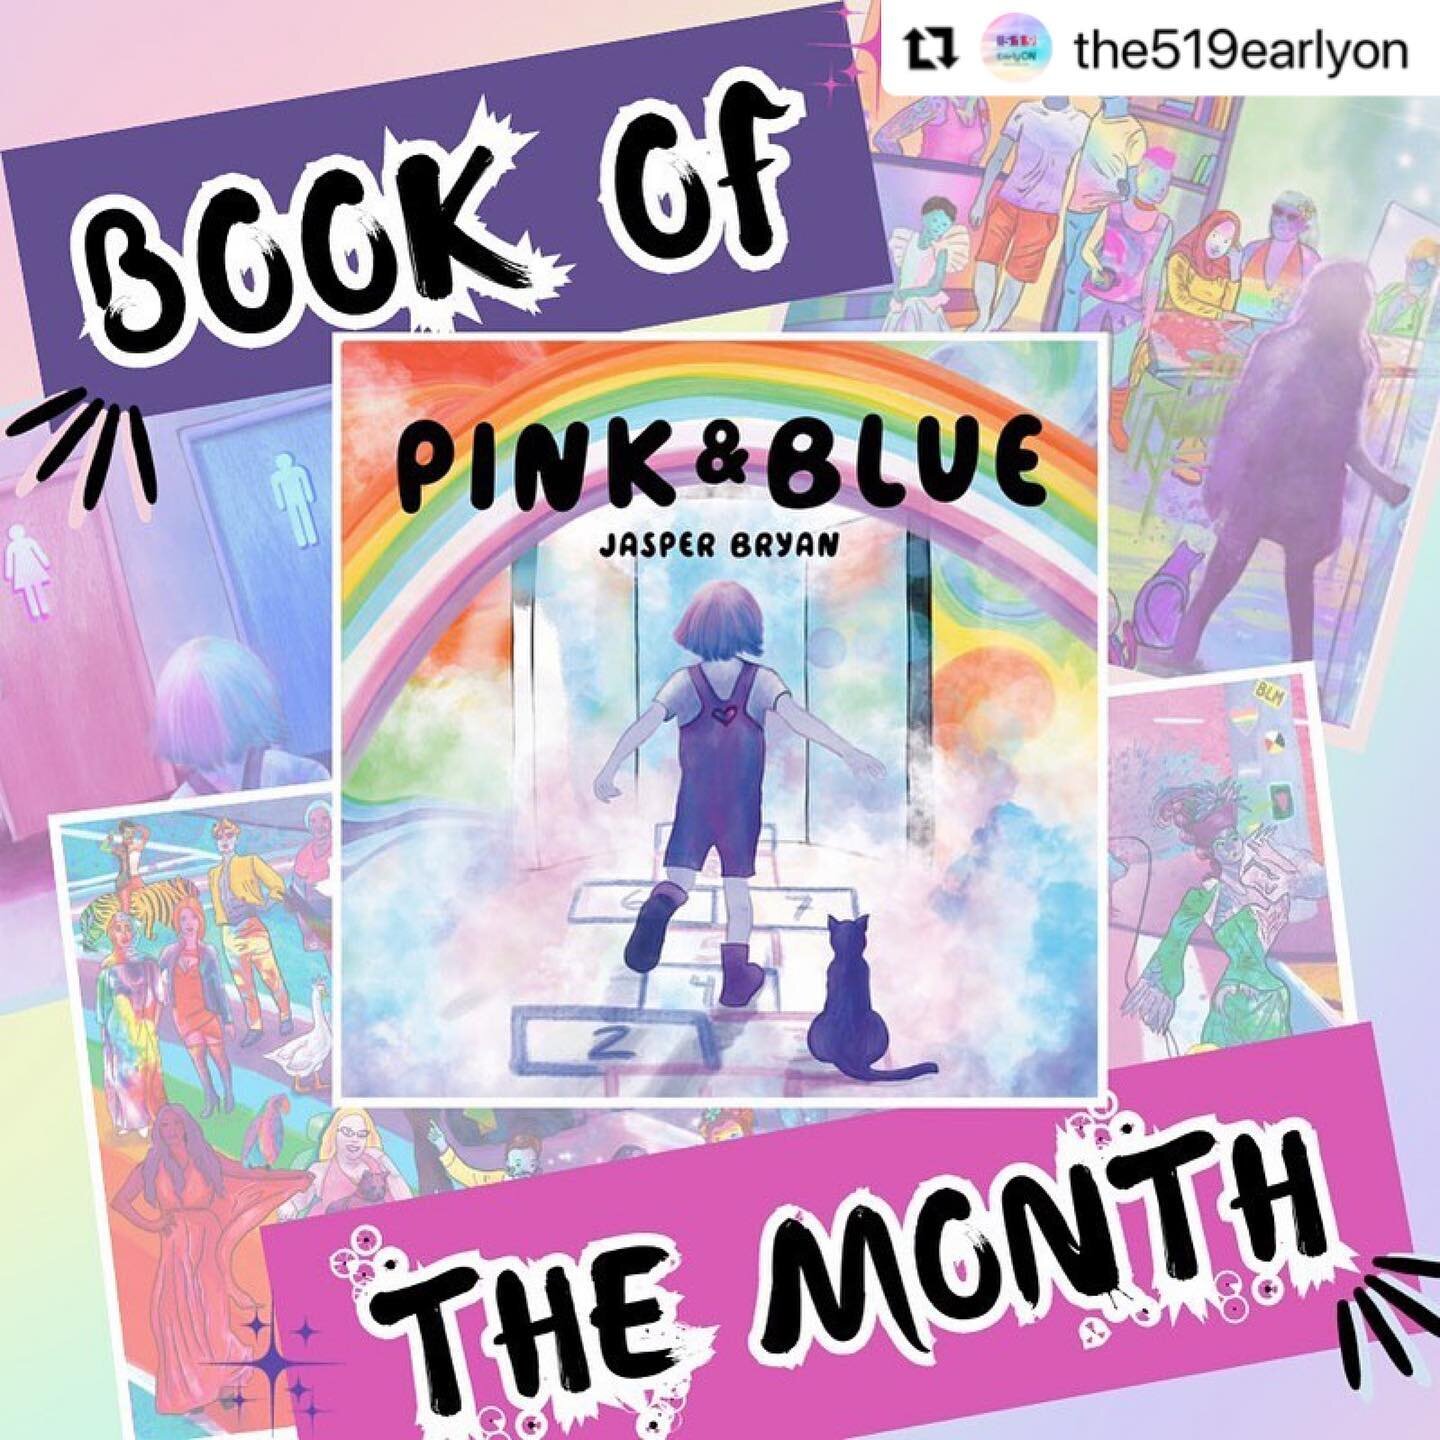 I am so honoured to be featured as @the519earlyon book of the month! 🥰😍🌈 To be recognized by a foundation of our community means the world. You can order your copy on my website (link in bio) 💕 @the519